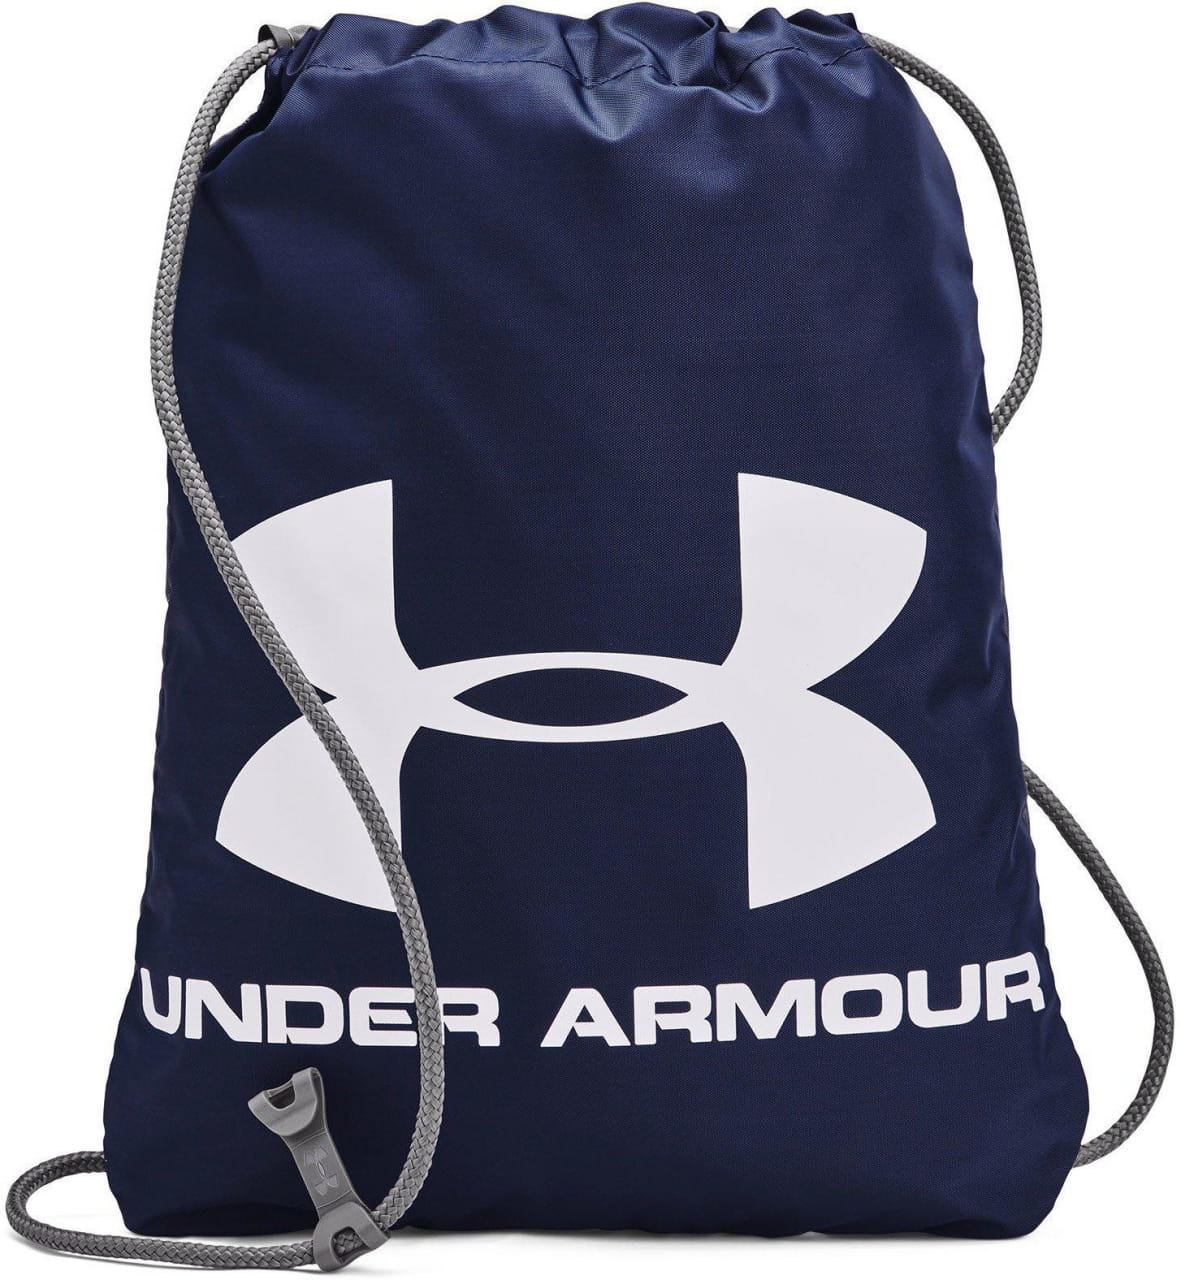 Sport rugzak Under Armour Ozsee Sackpack-NVY